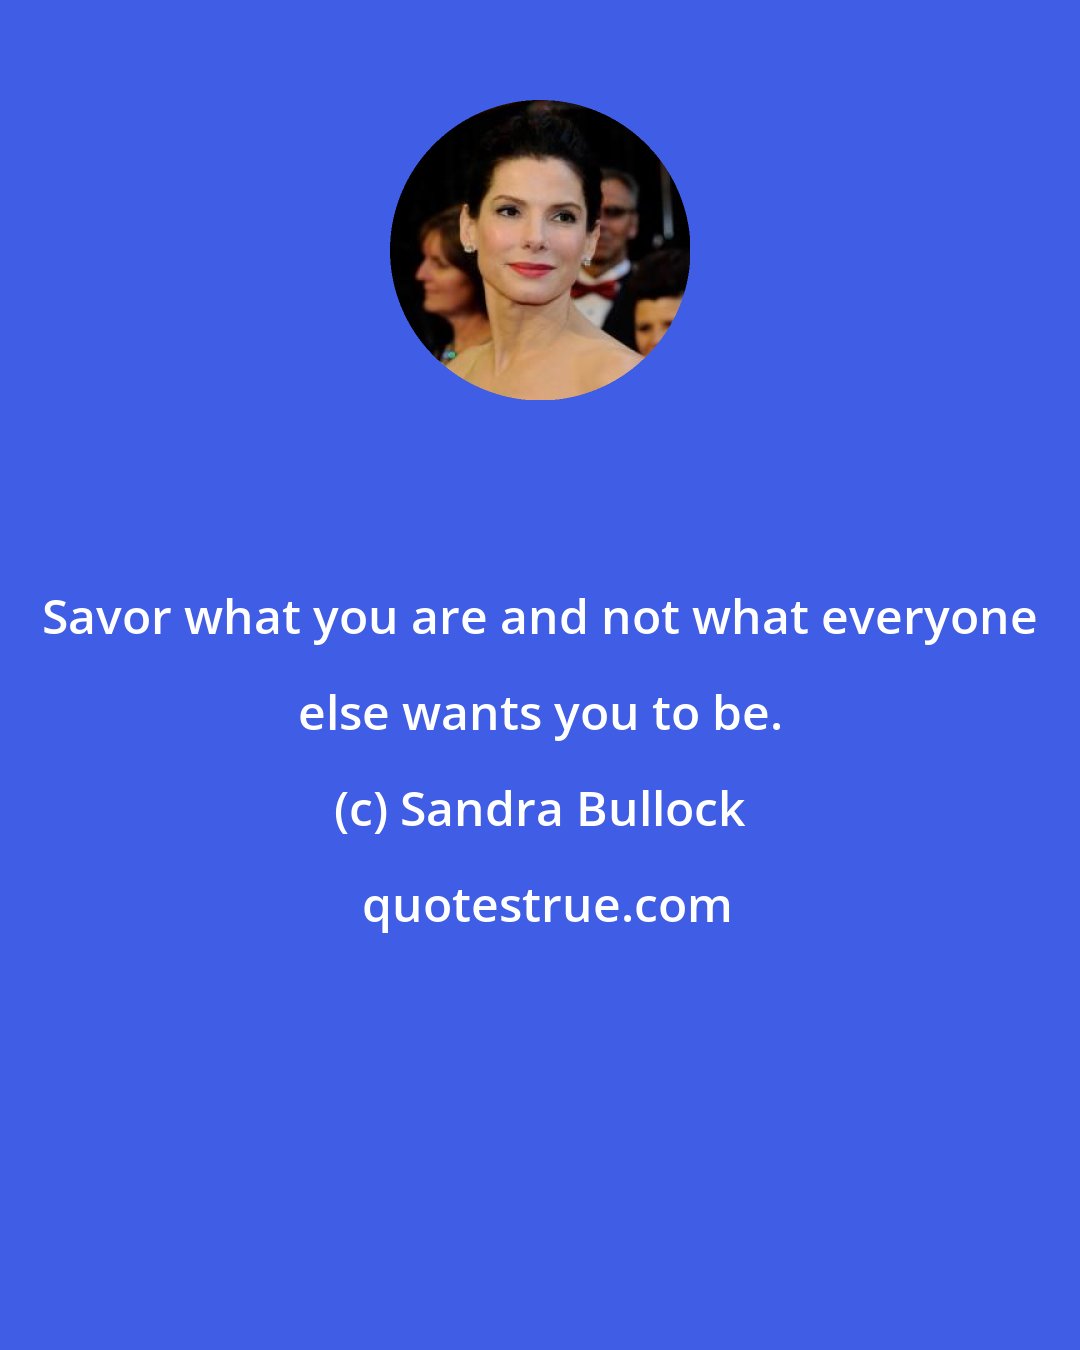 Sandra Bullock: Savor what you are and not what everyone else wants you to be.